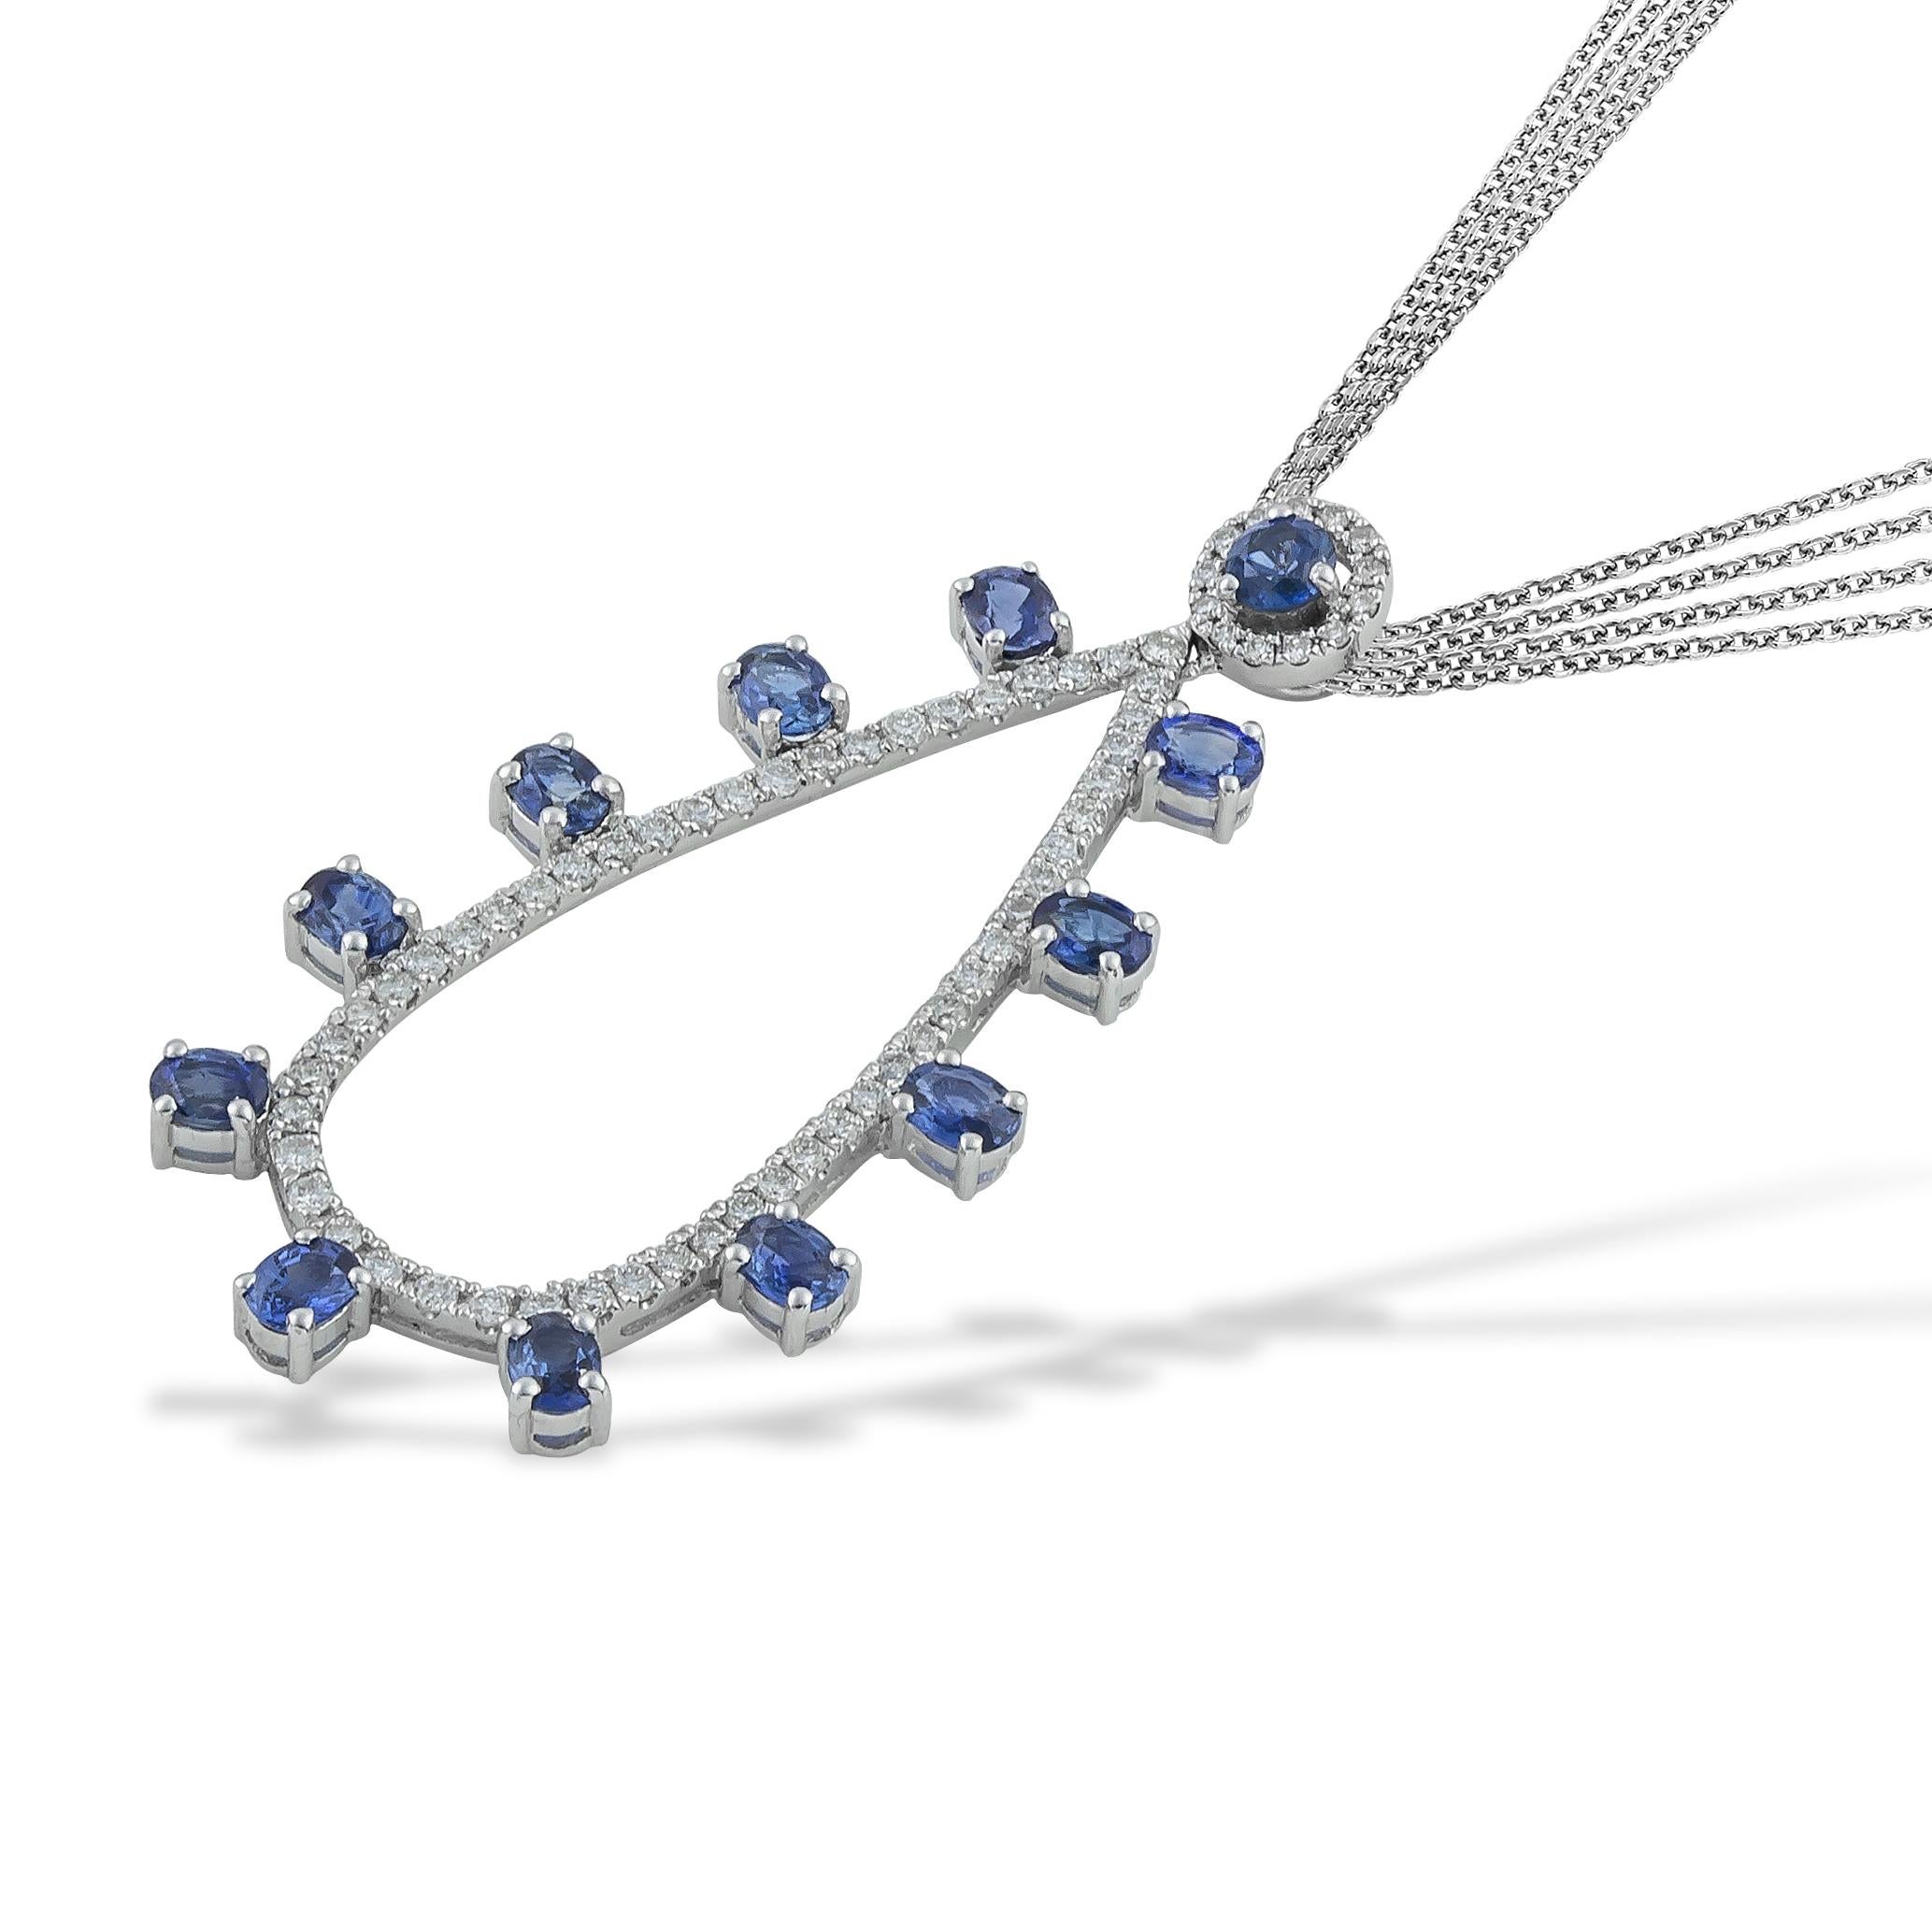 Radiated Oval Blue Sapphires 2.90 Carat in a spectacular Drop - Pear shape Pendant -Necklace set with 0.81 ct briliant cut Diamonds in 18kt White Gold. Original, Elegant with a fluid shape wear well with any look. This sapplire blue drop comes with